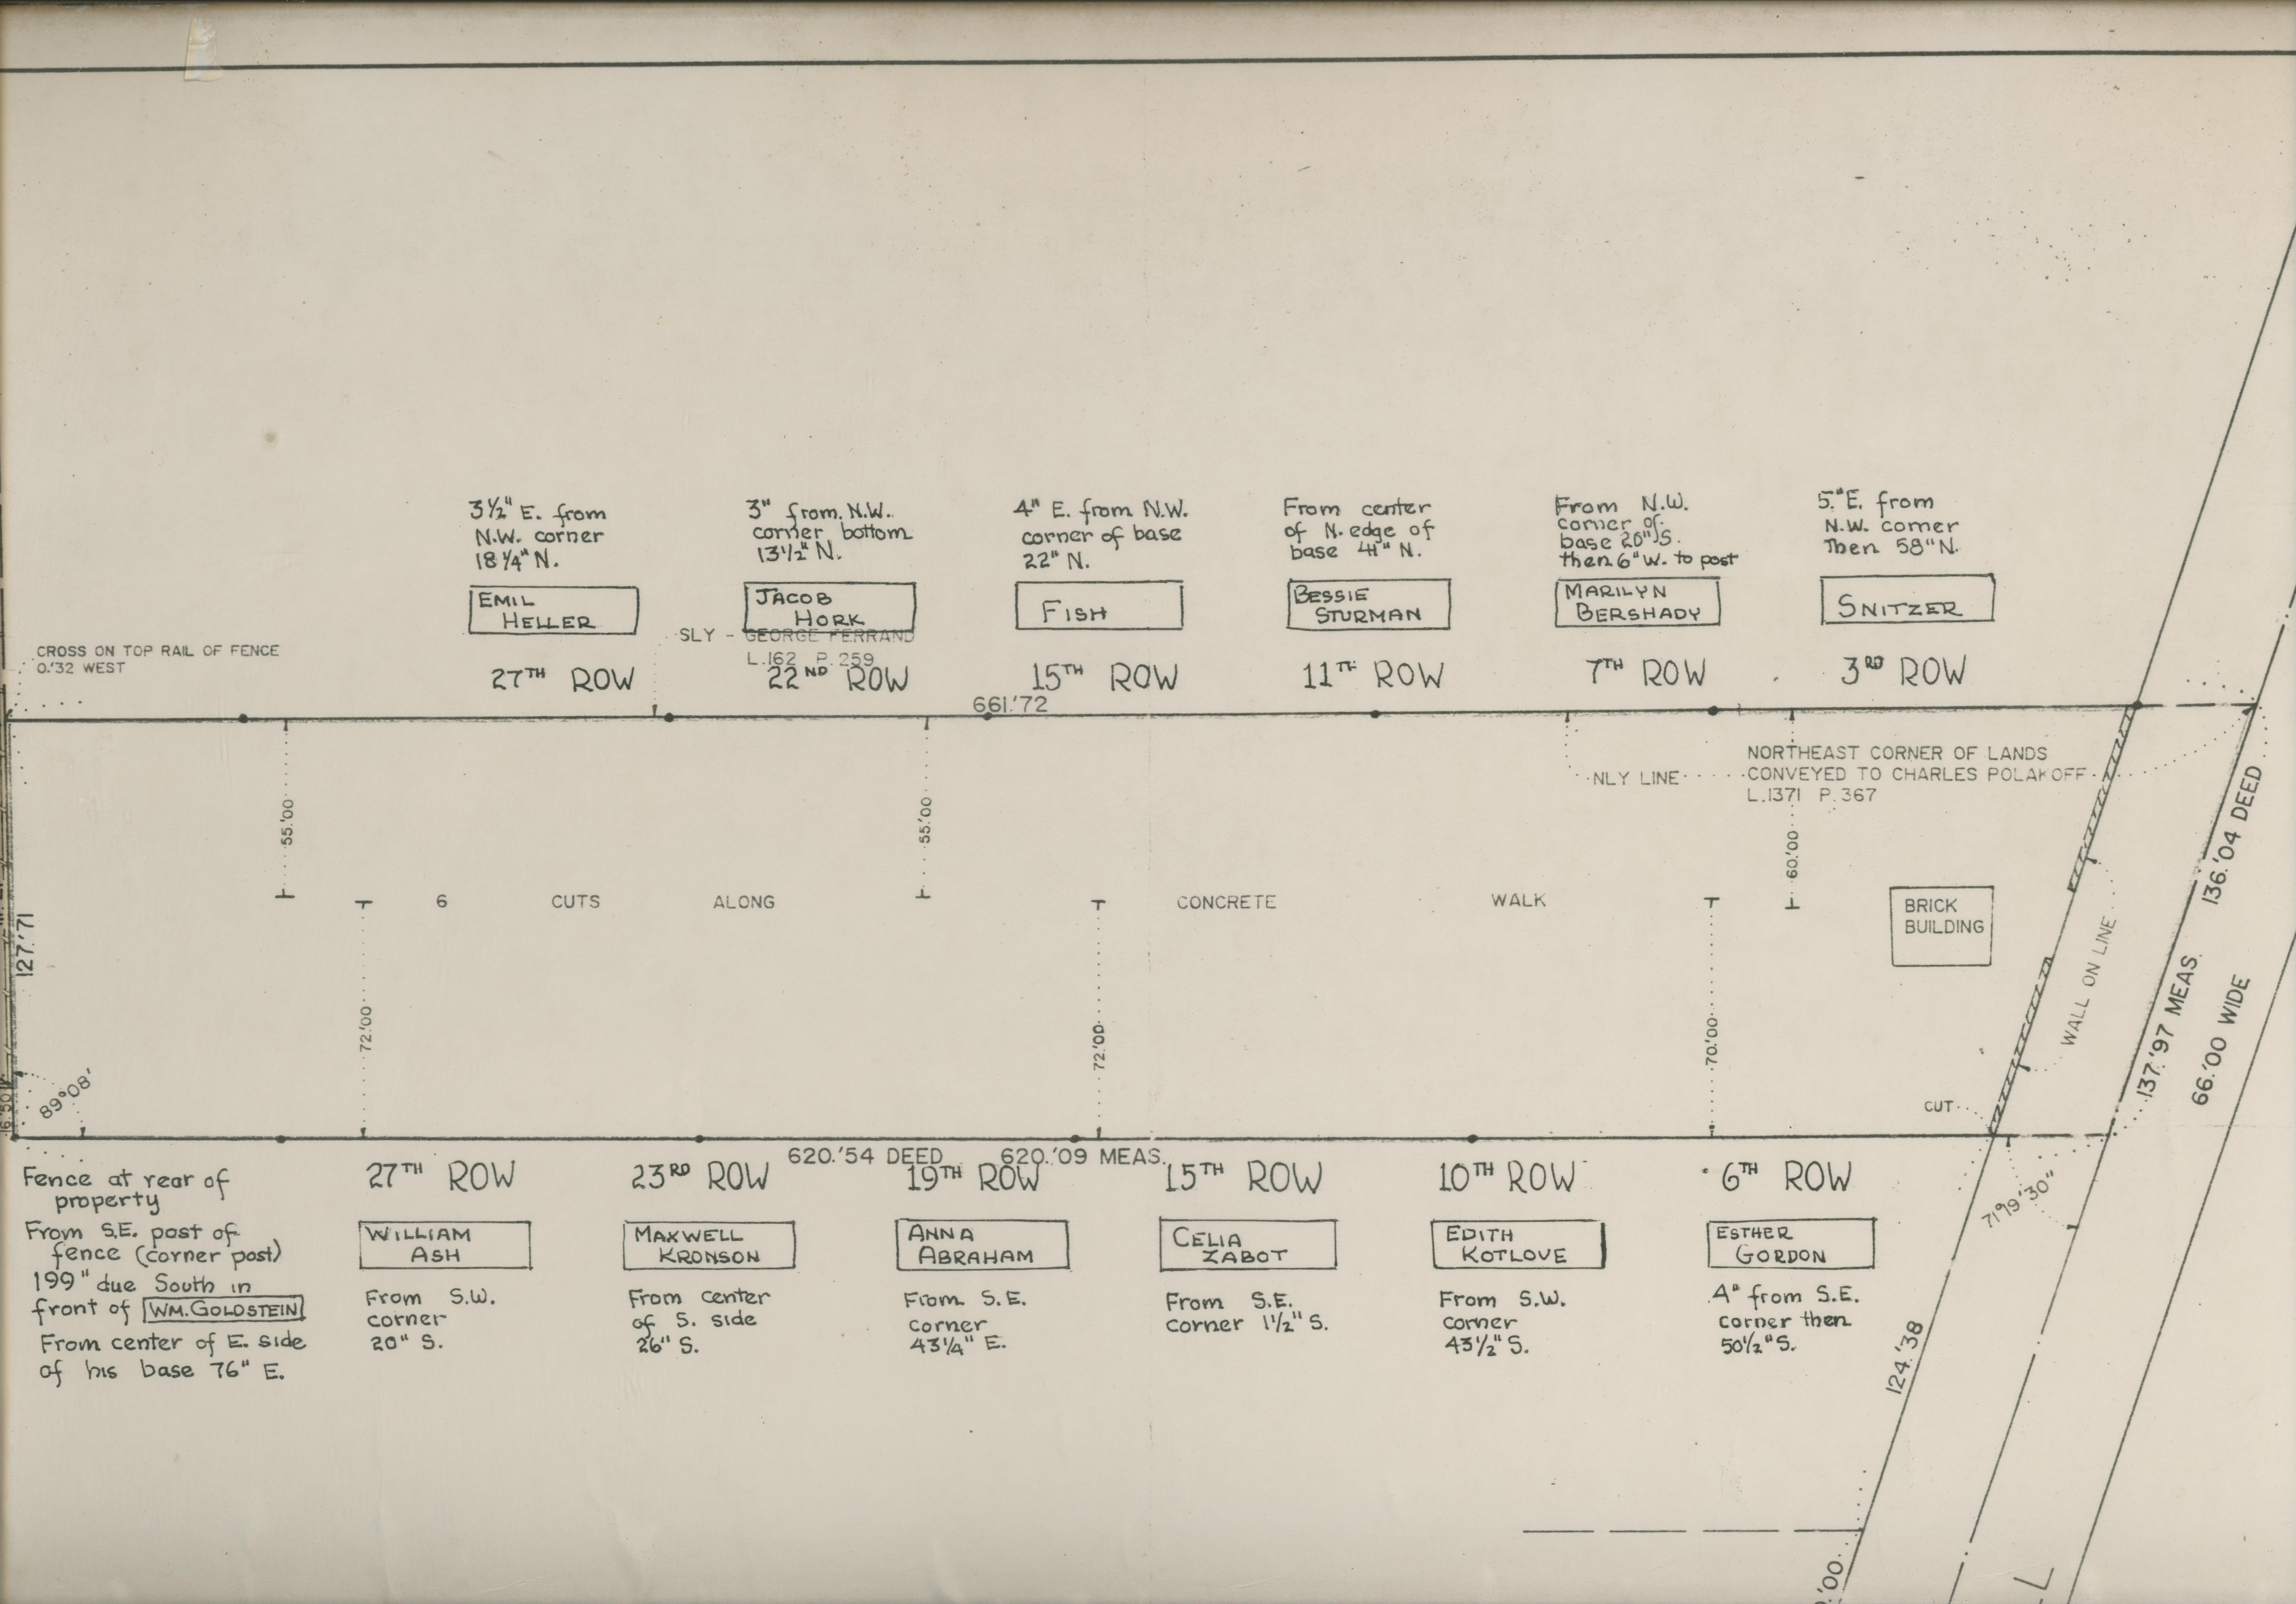 Holy Order of the Living Buffalo, NY. Layout of Cemetery, undated